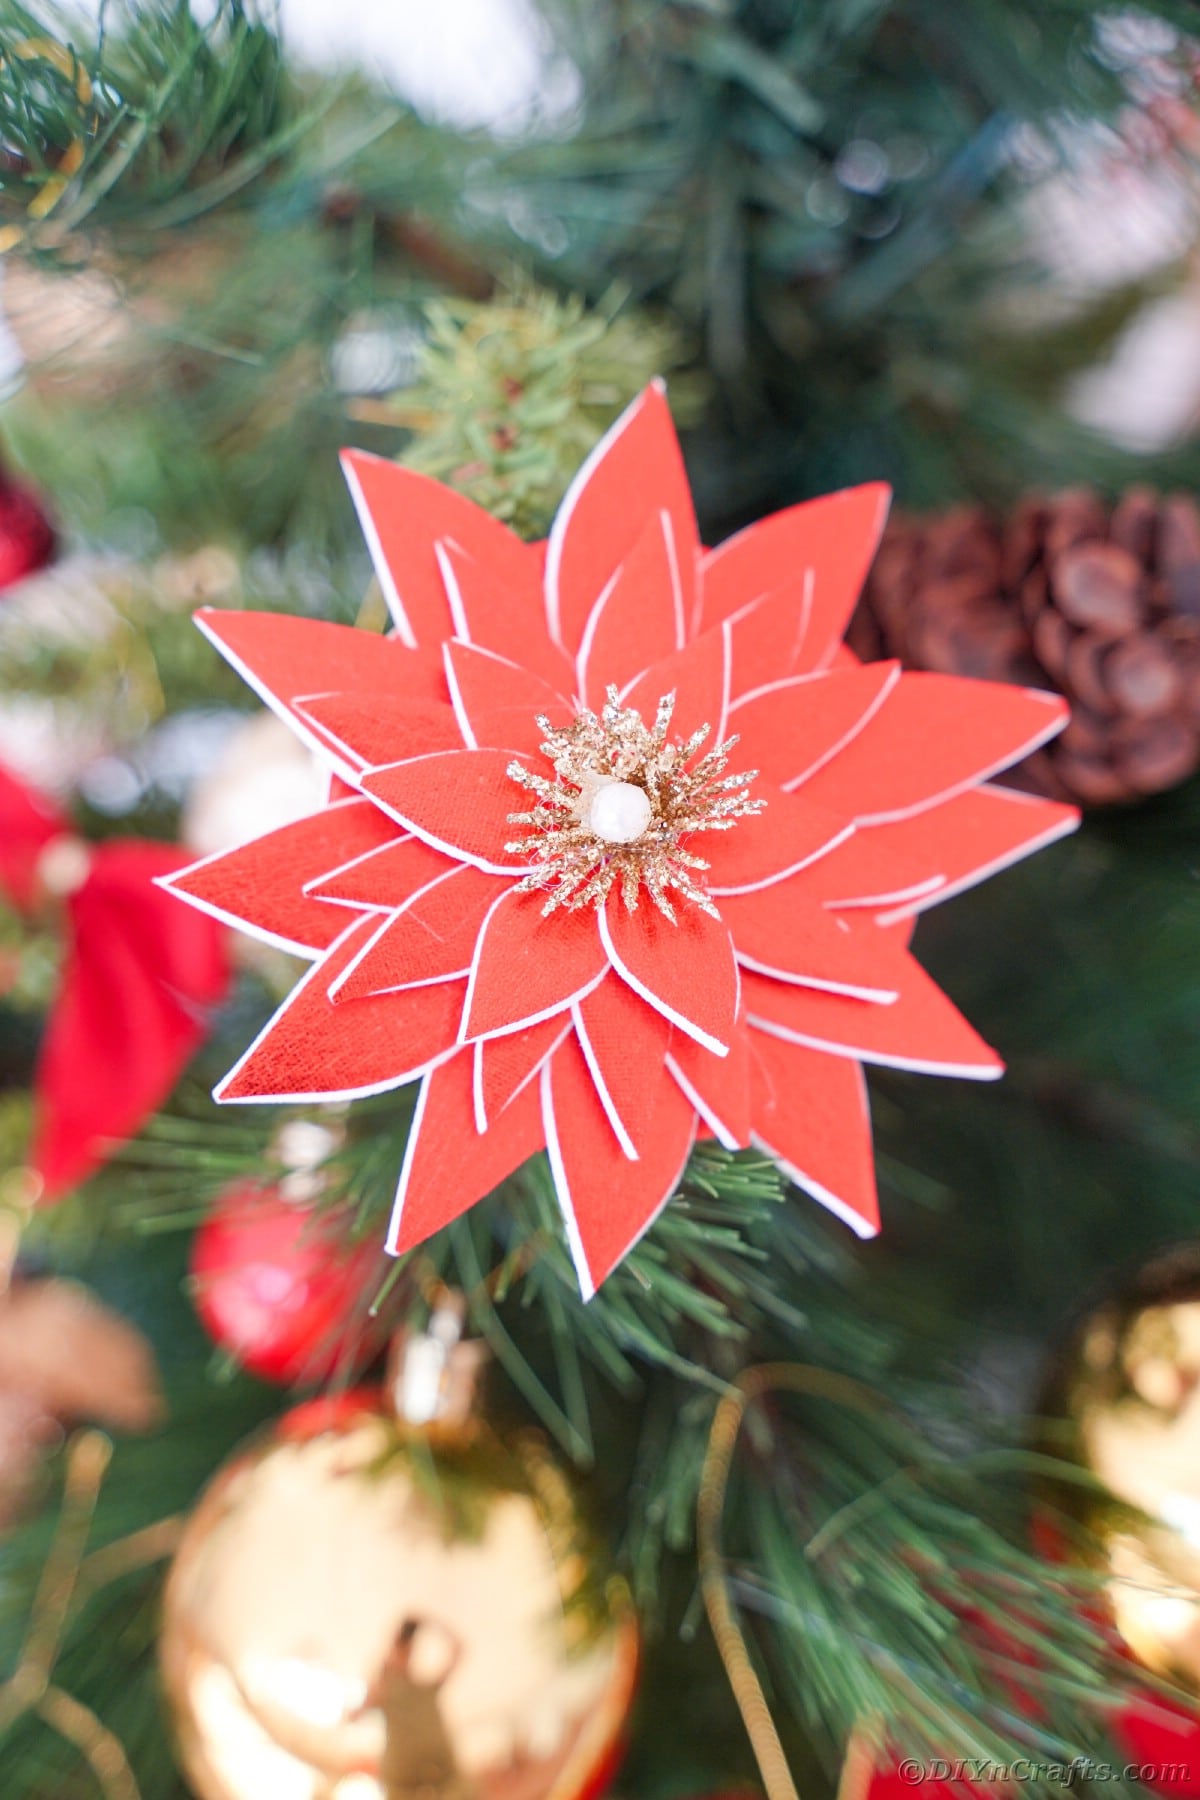 poinsettia ornament hanging on holiday tree